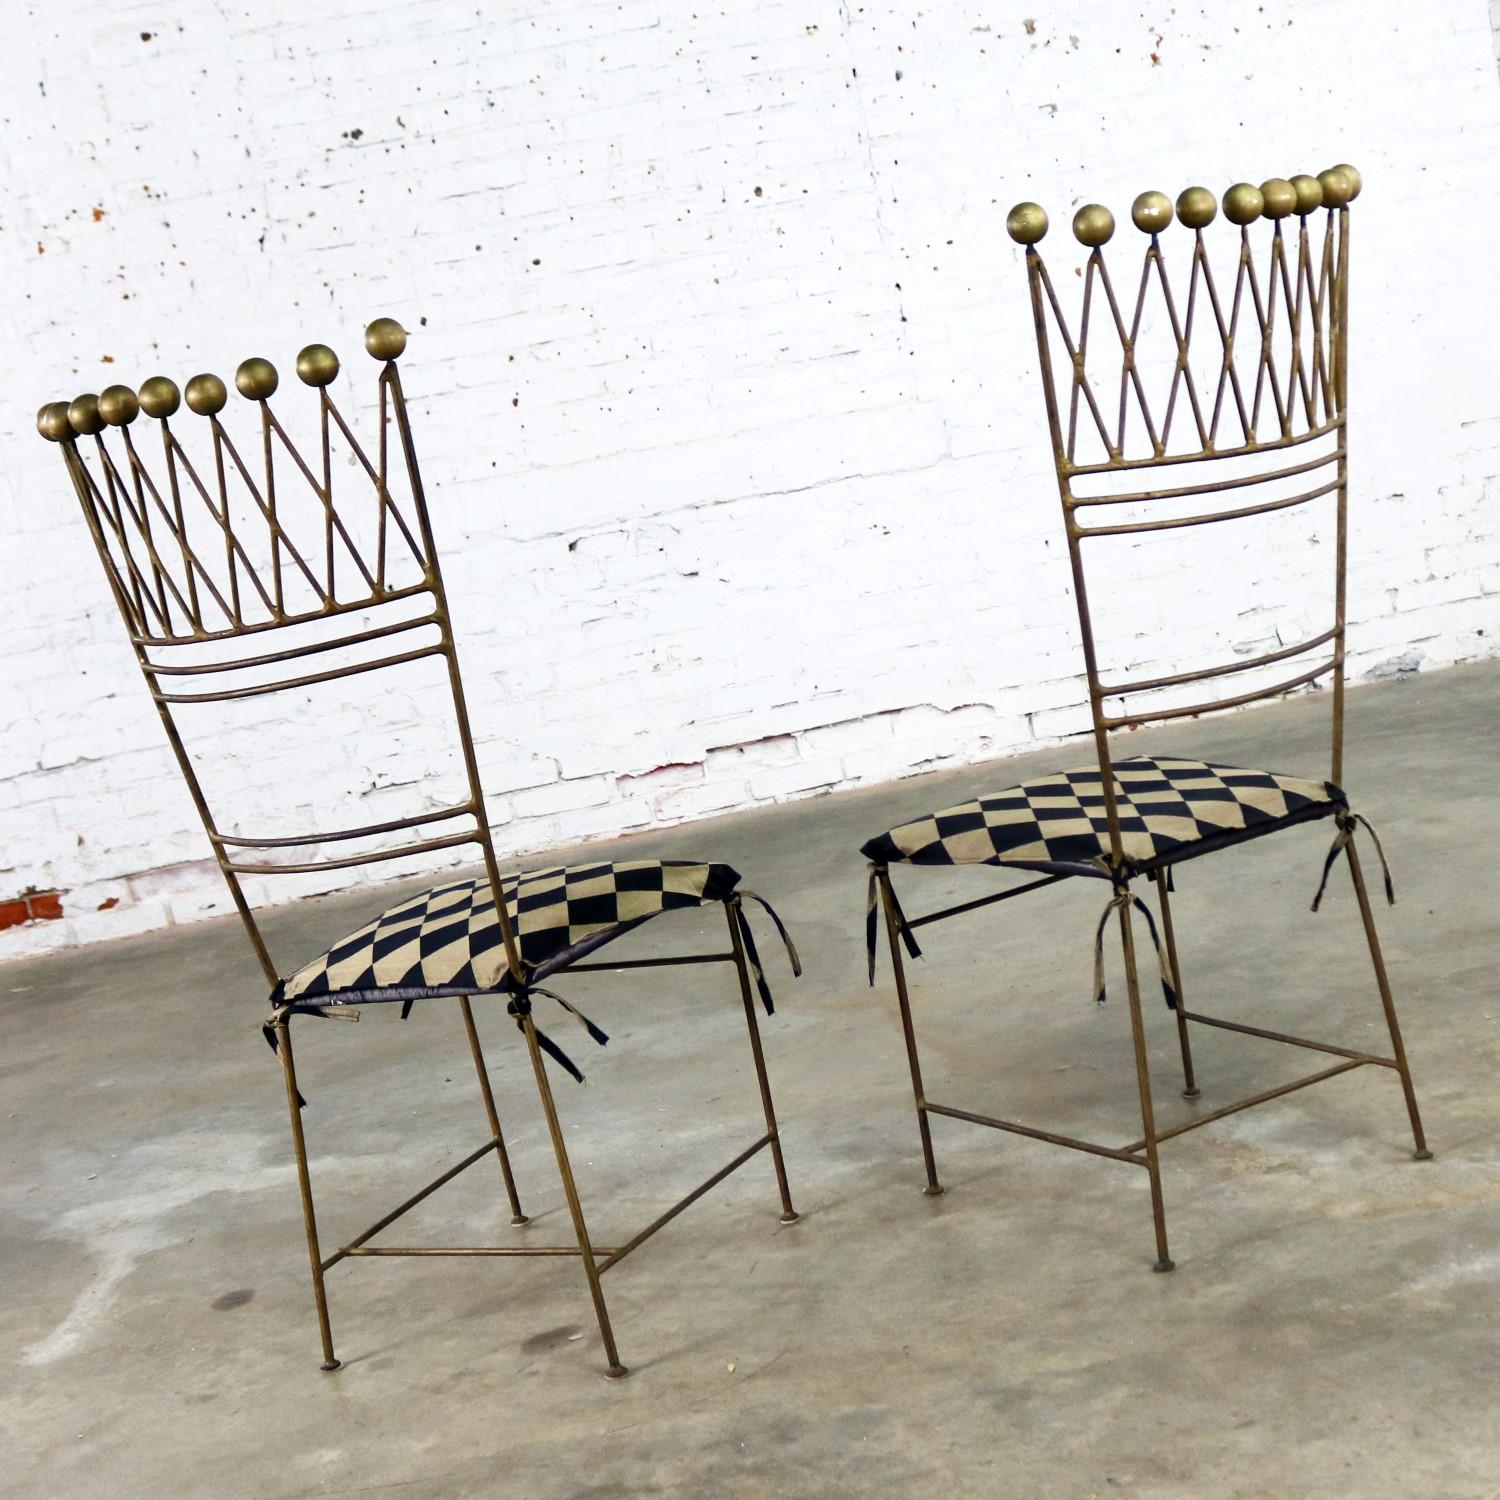 20th Century Pair of Gilt Iron Chairs Crown or Harlequin Style Ball Finials Art Deco